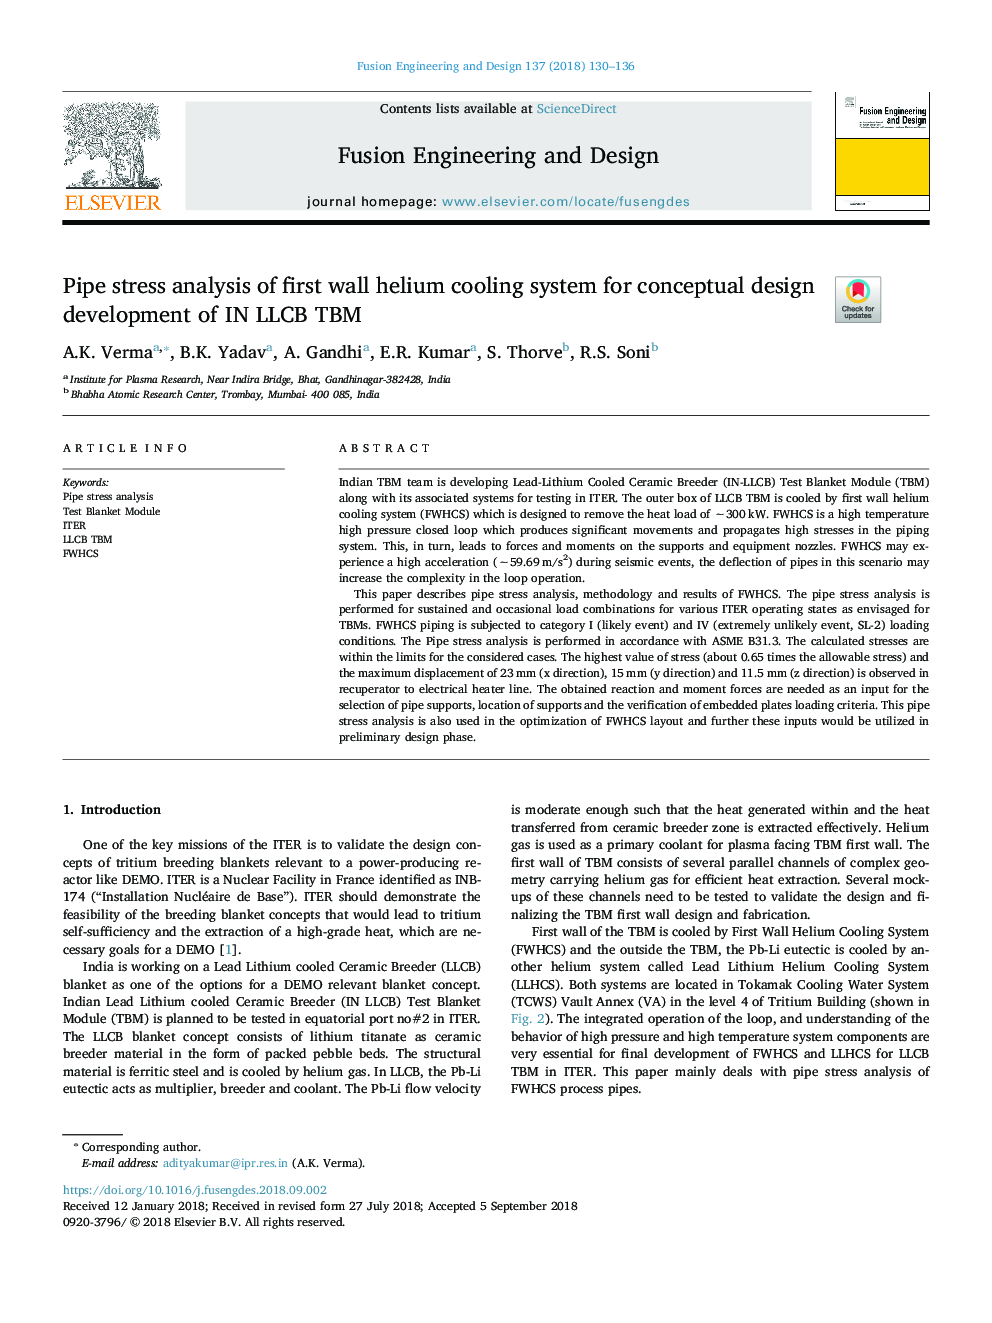 Pipe stress analysis of first wall helium cooling system for conceptual design development of IN LLCB TBM